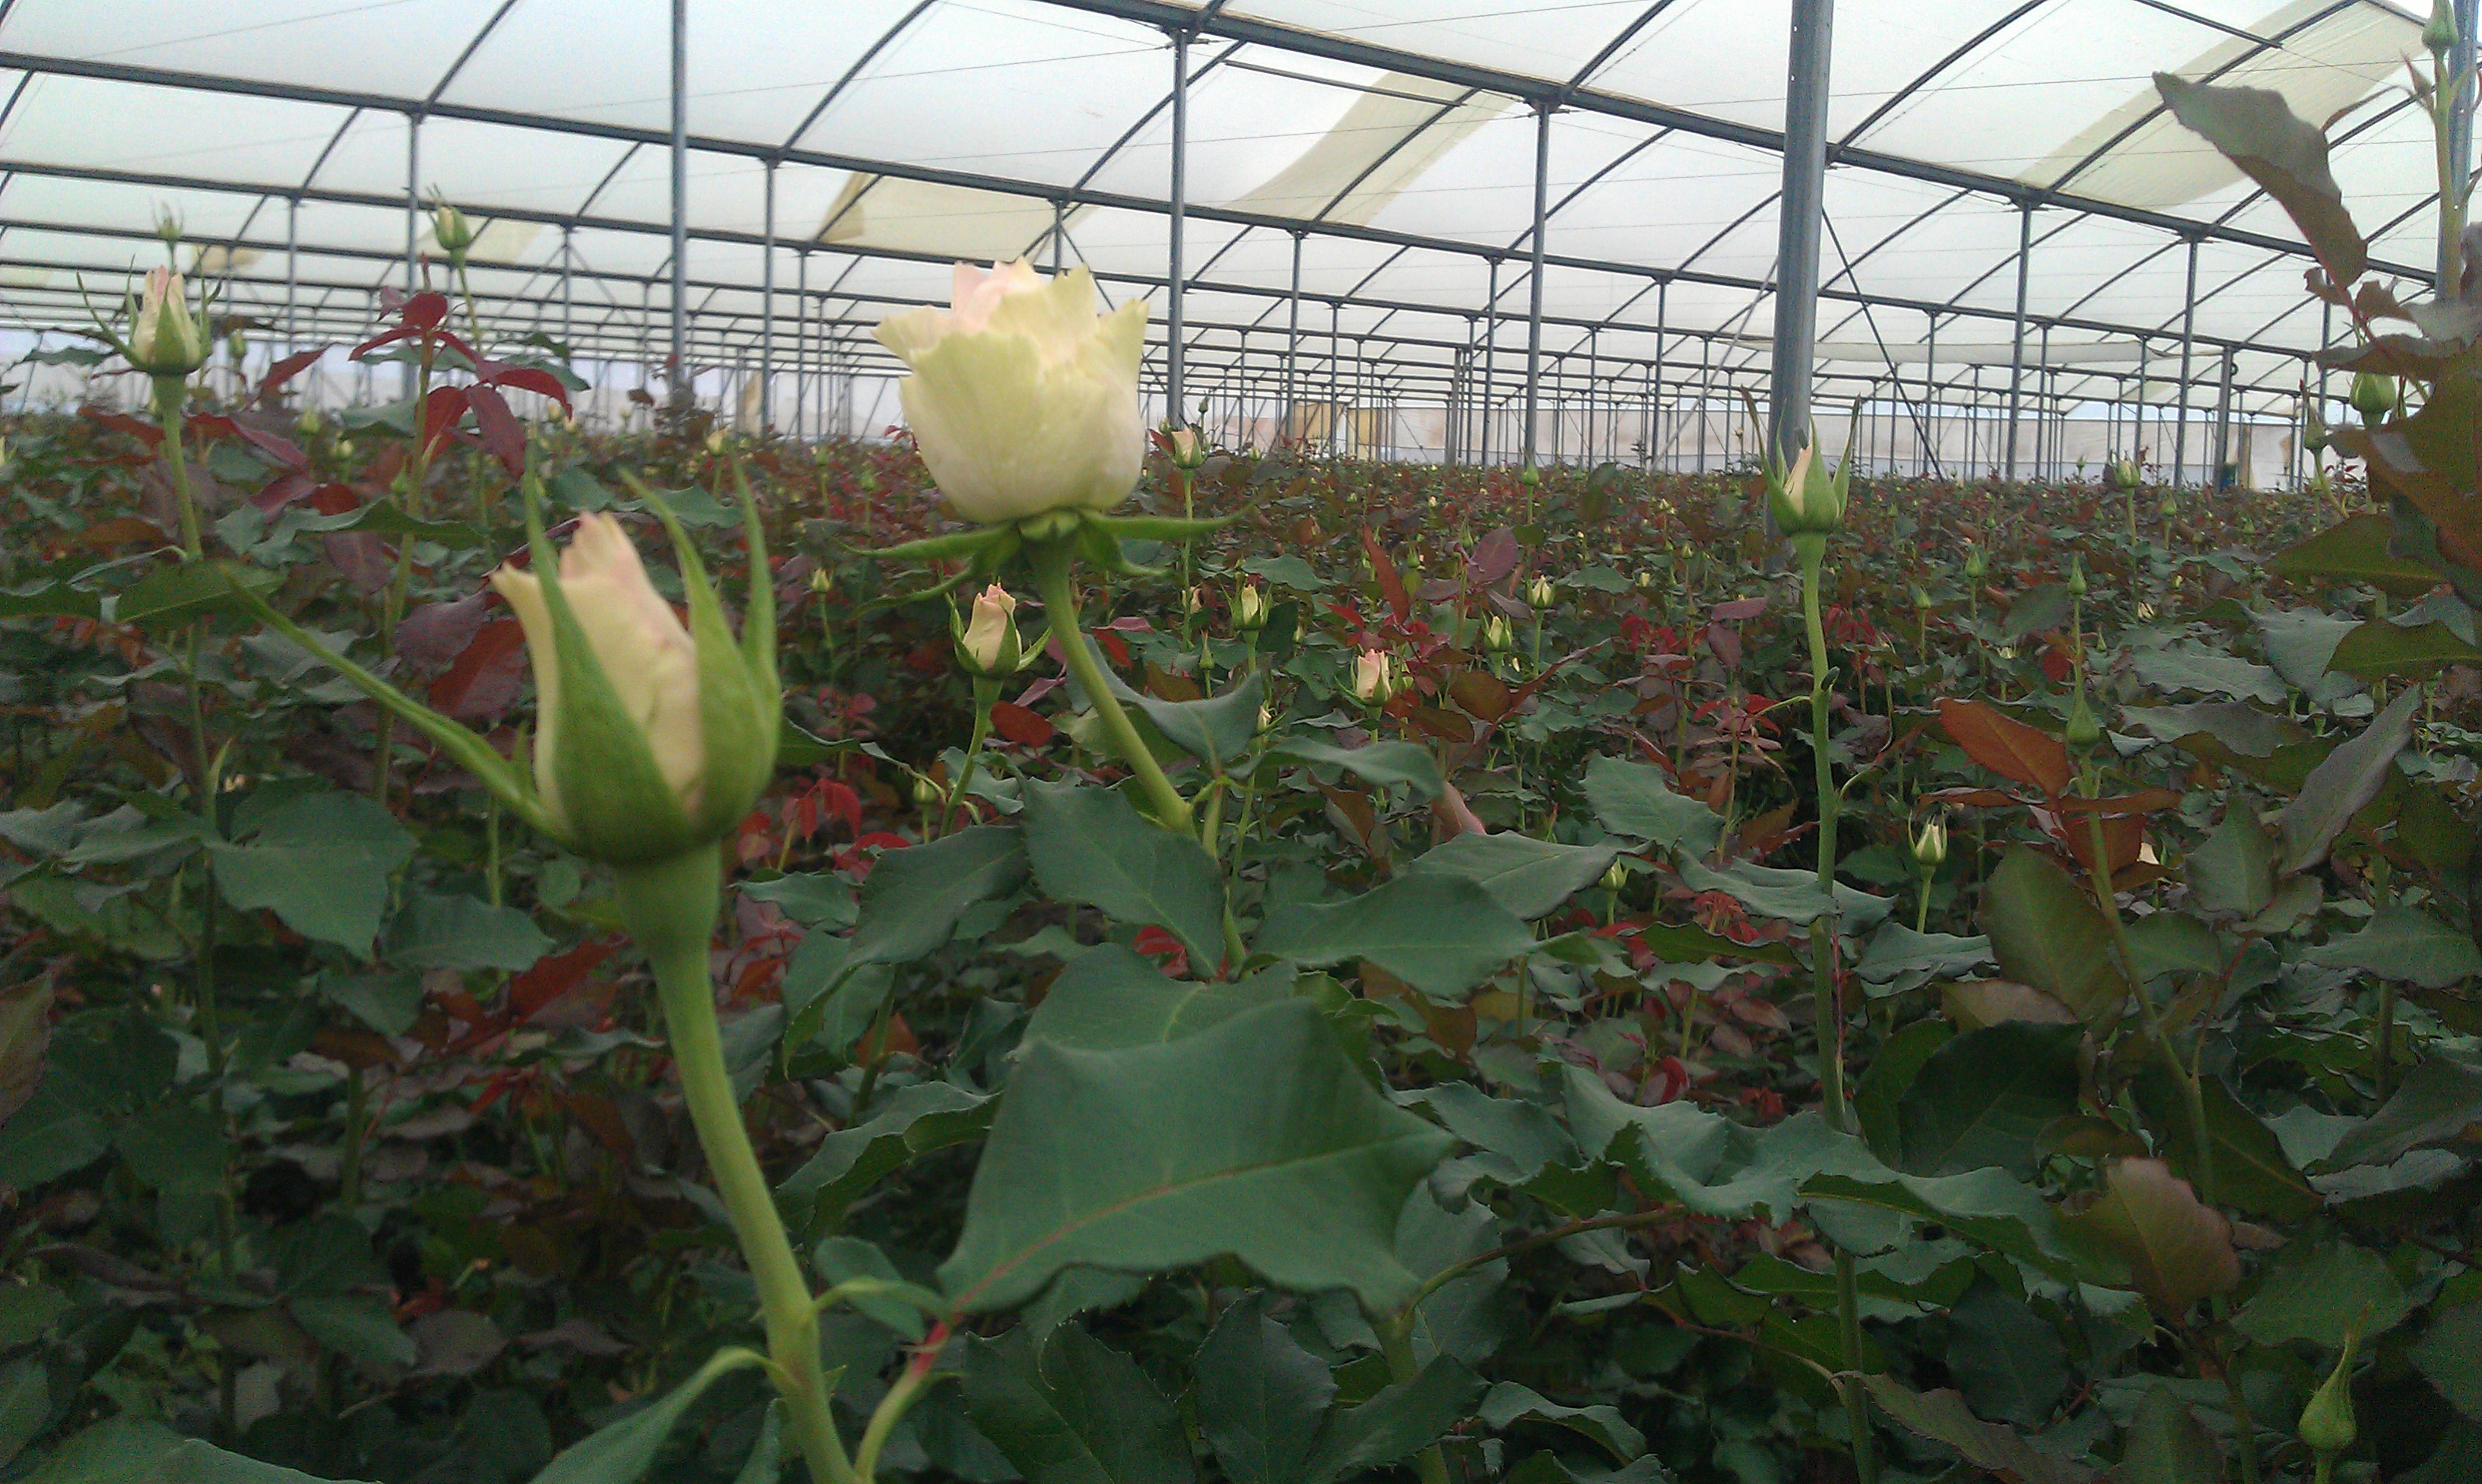 Workshop excursion: Value Chain integration at an export-oriented flower farm